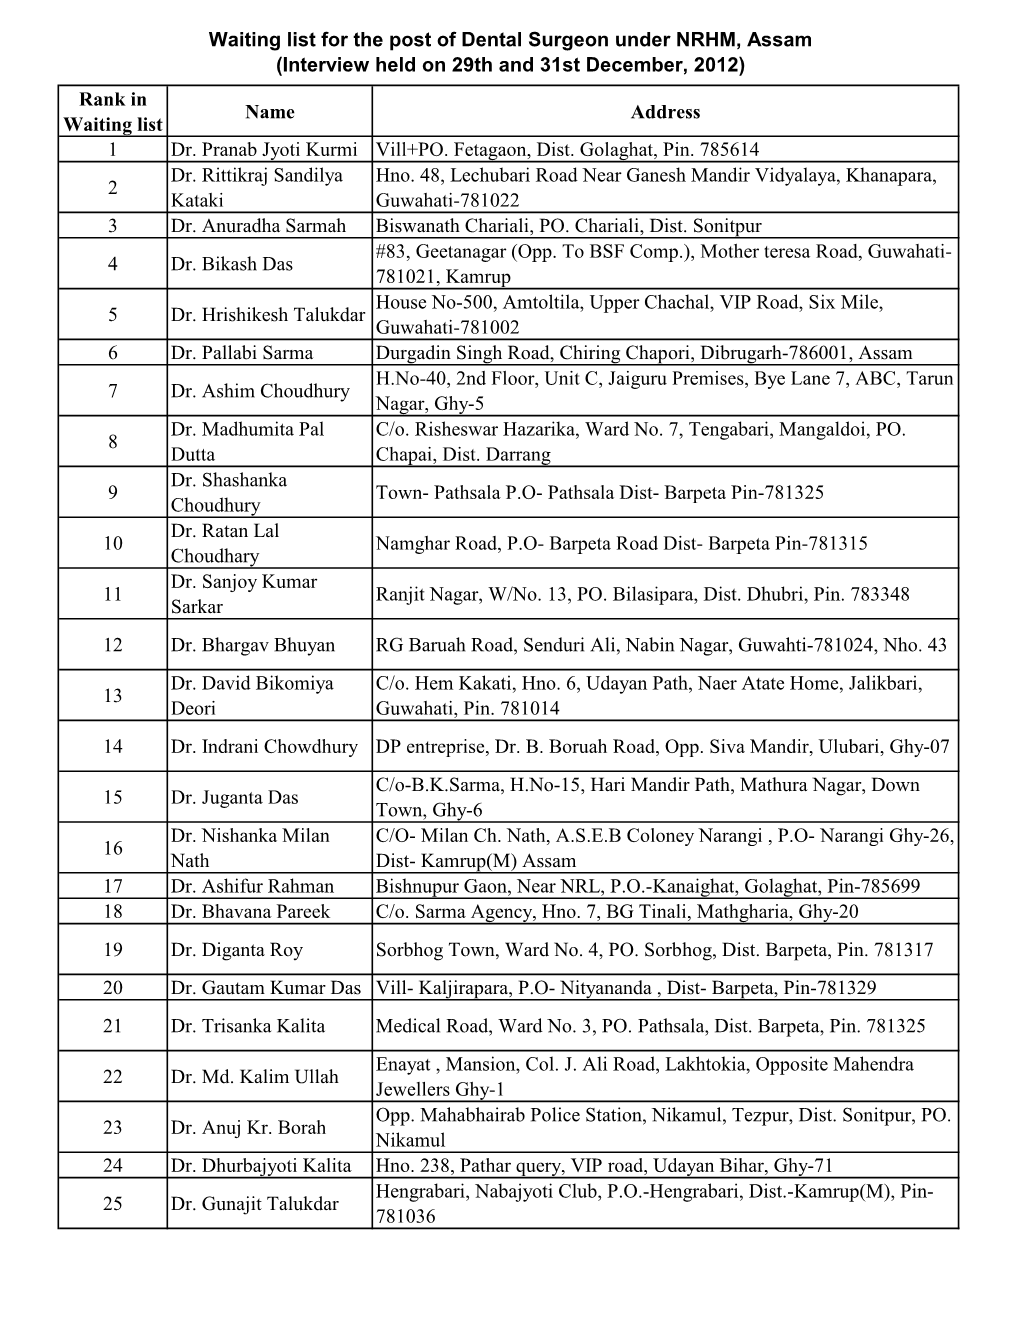 Waiting List for the Post of Dental Surgeon Under NRHM, Assam (Interview Held on 29Th and 31St December, 2012) Rank in Name Address Waiting List 1 Dr